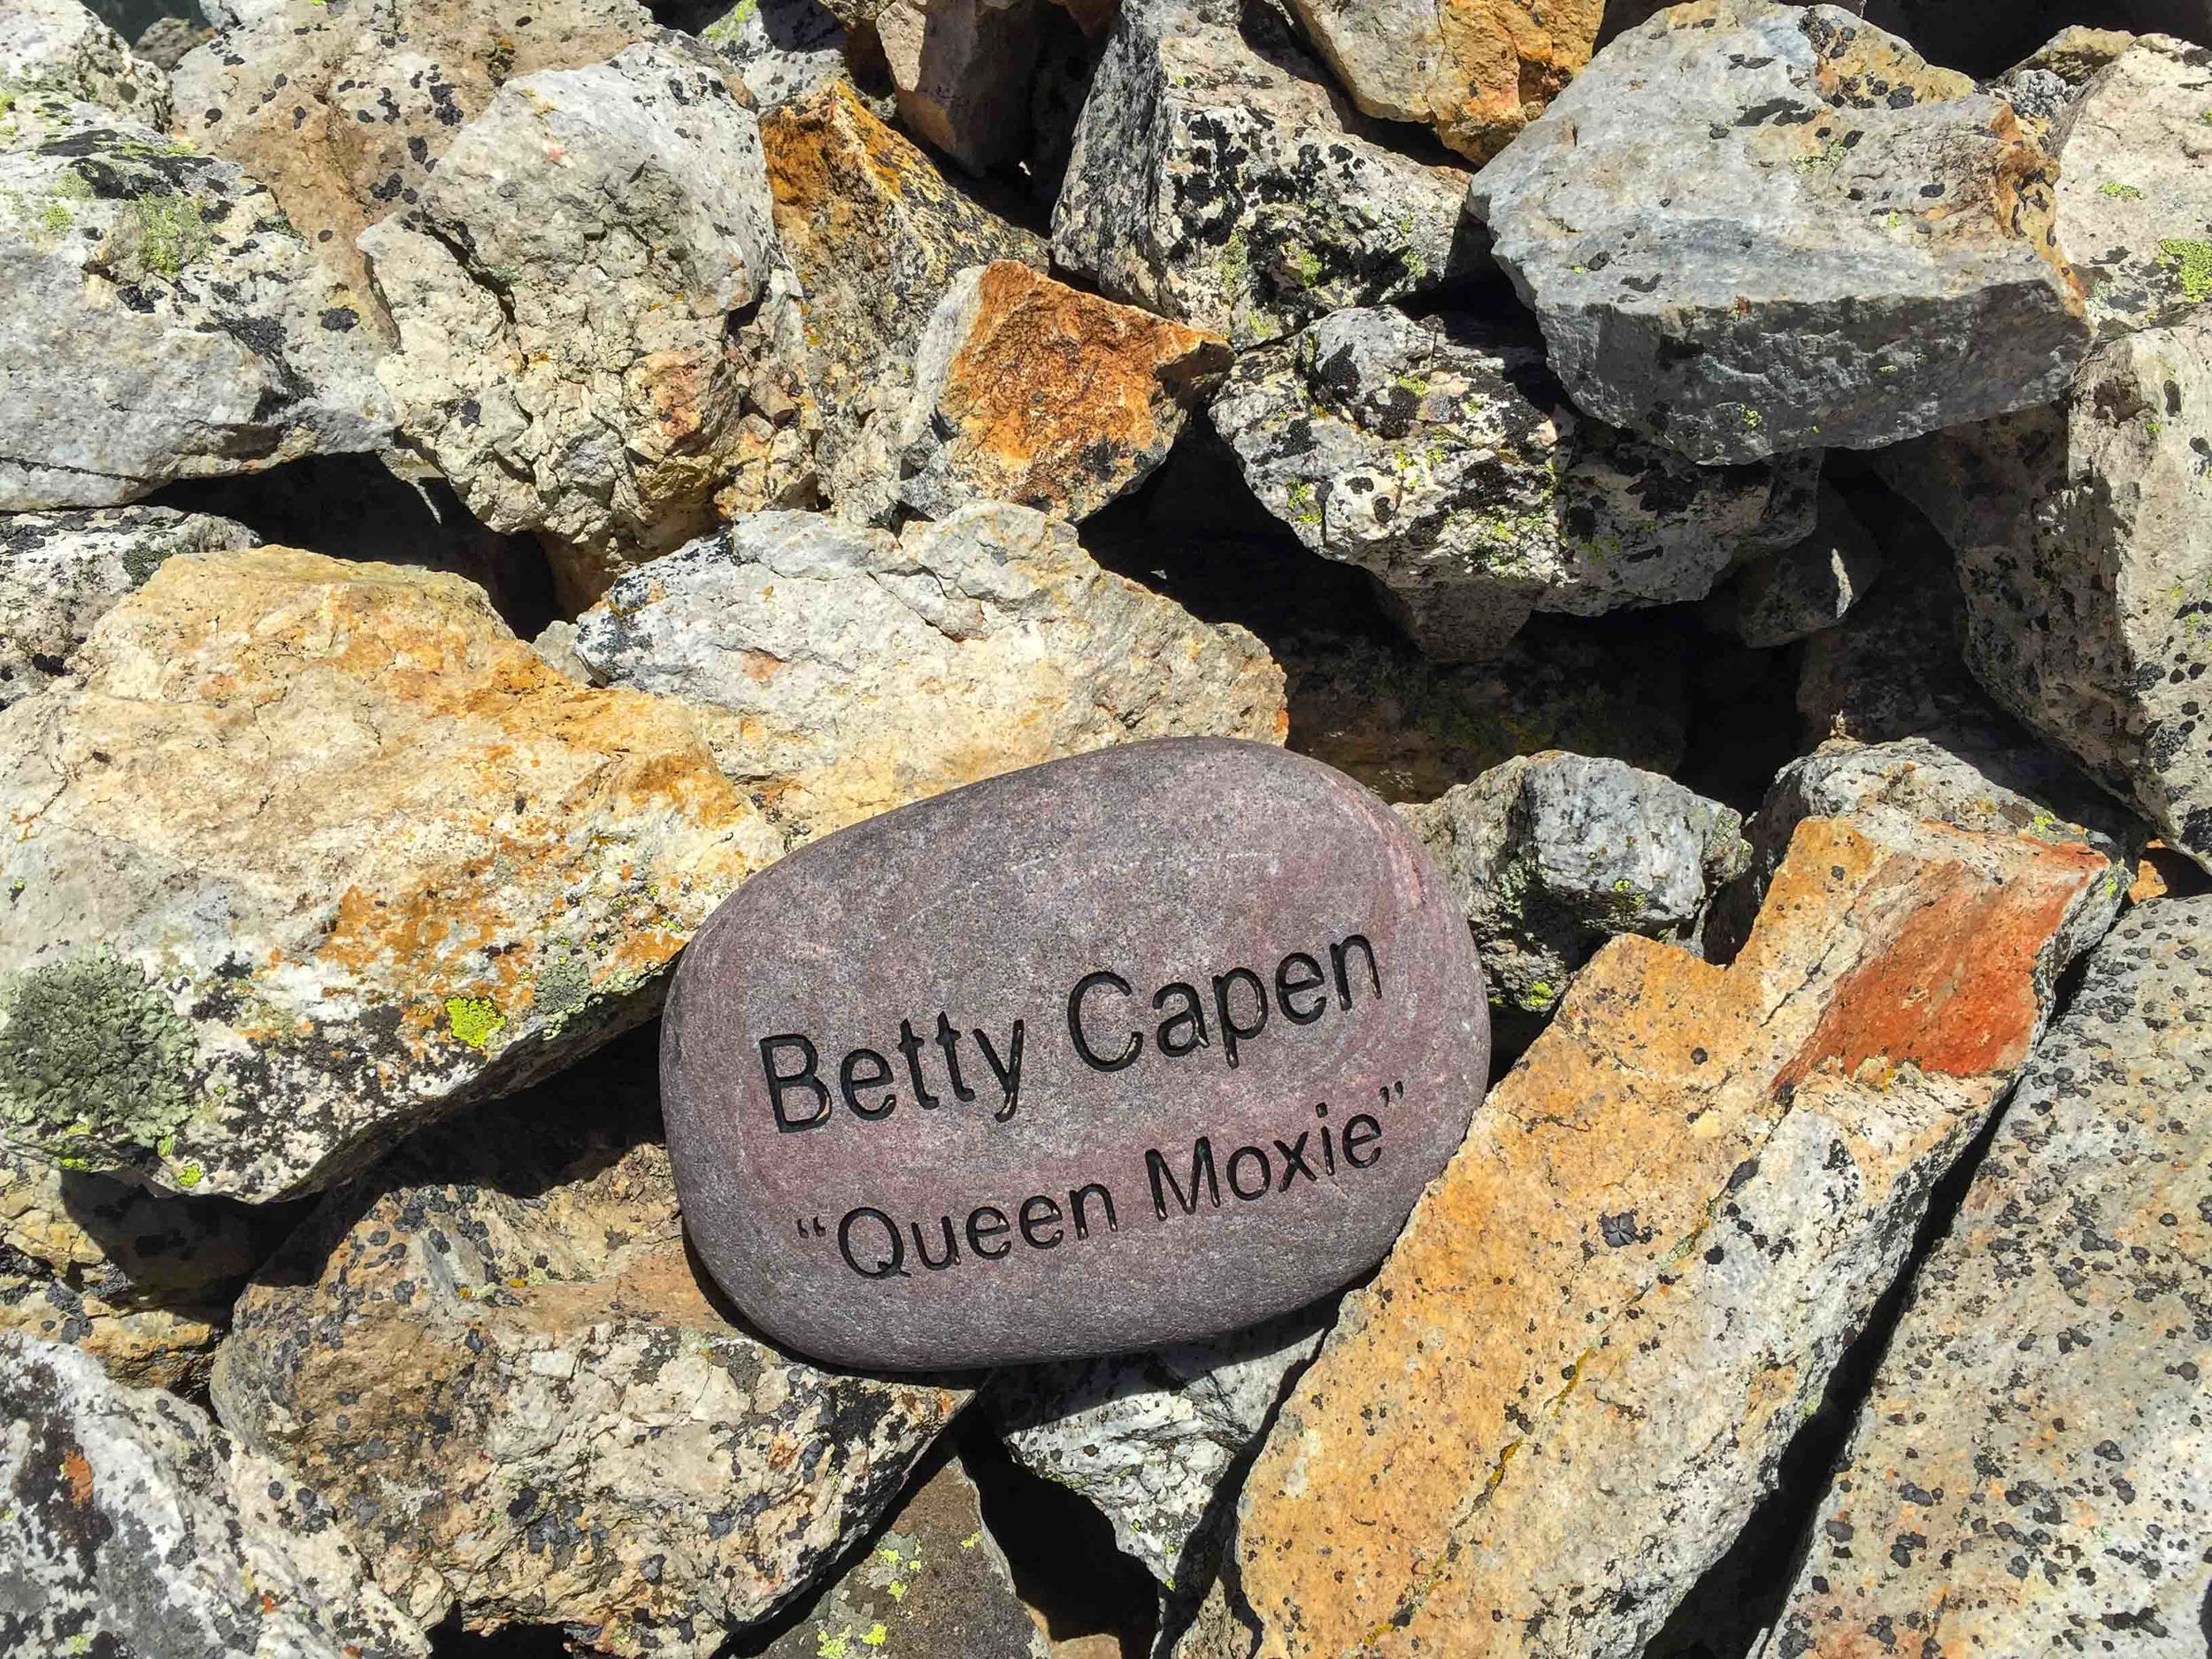 Betty Capen Rock at the summit